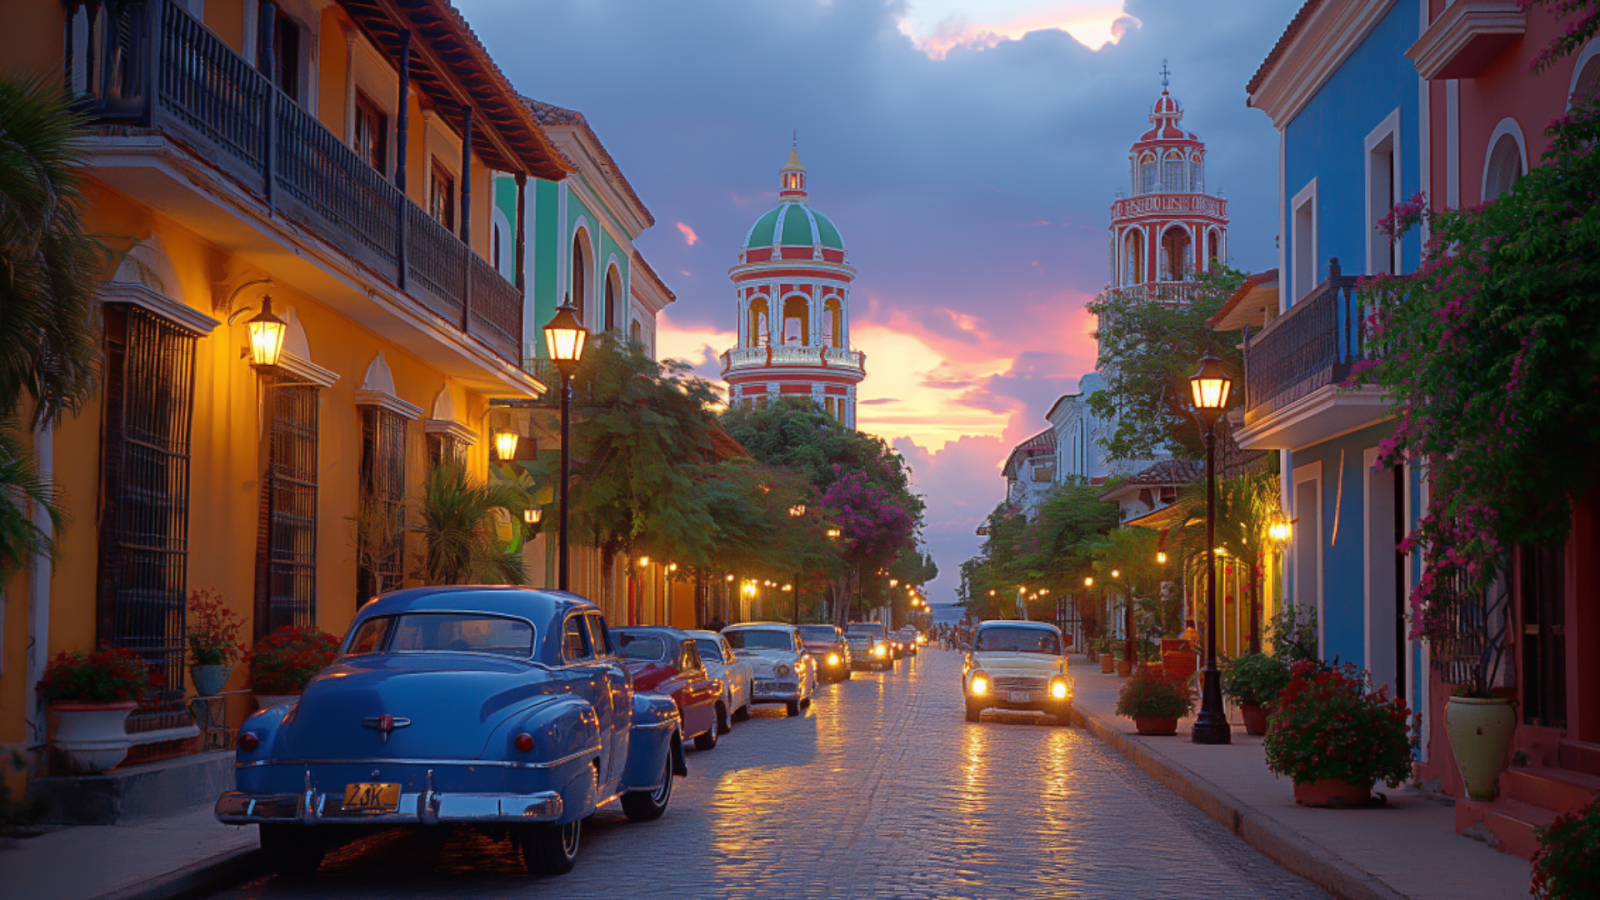 Evening life on Quinta Avenida with illuminated colonial buildings.